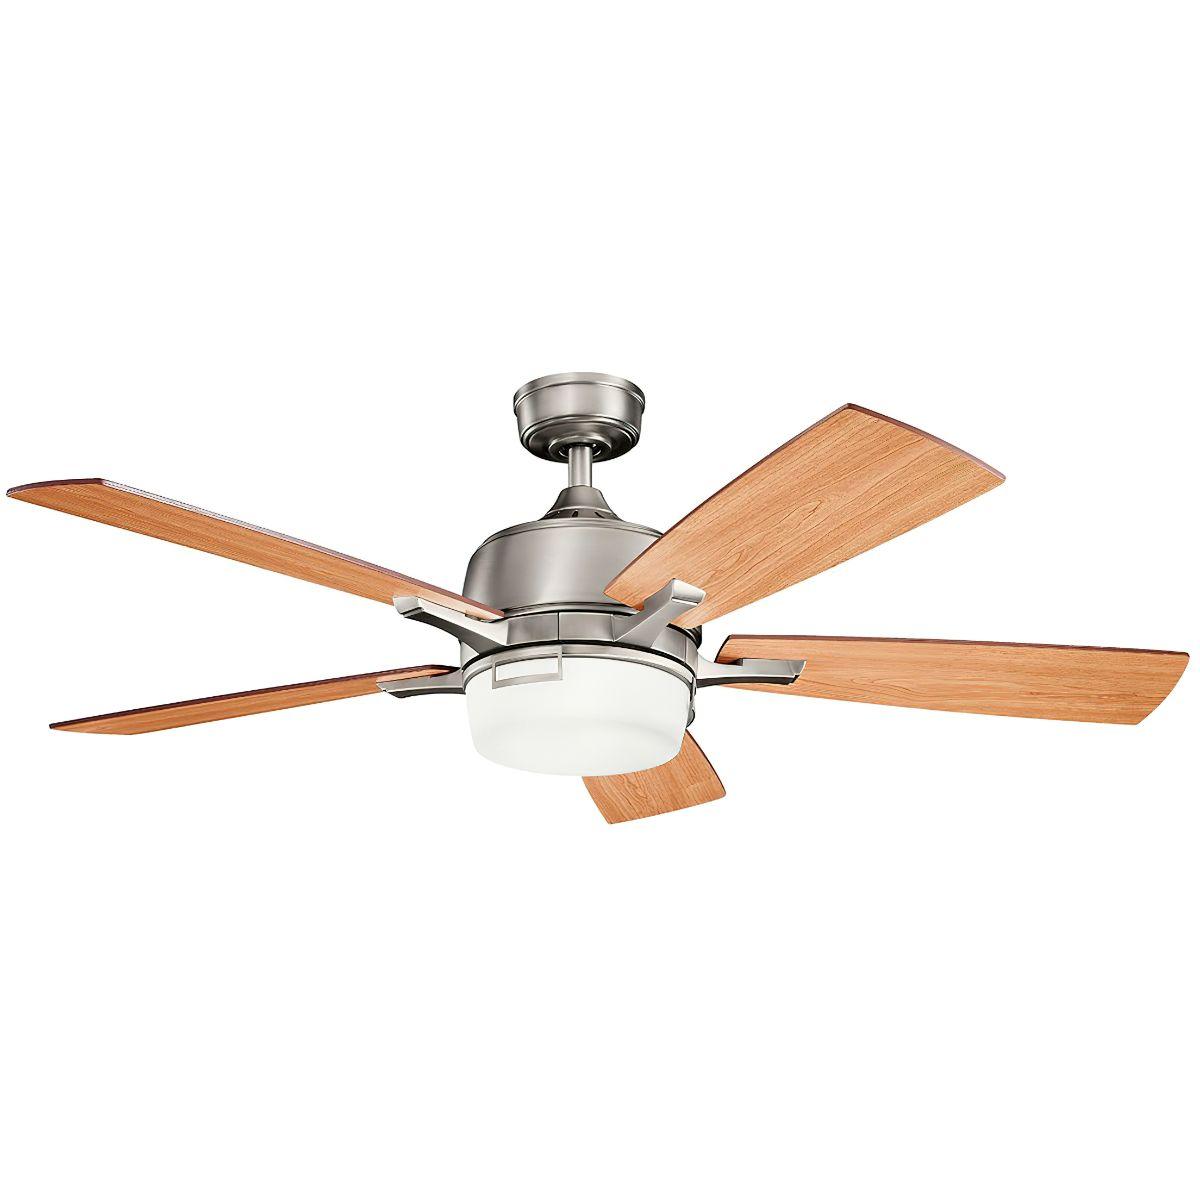 Leeds 52 Inch Ceiling Fan With Light, Wall Control Included